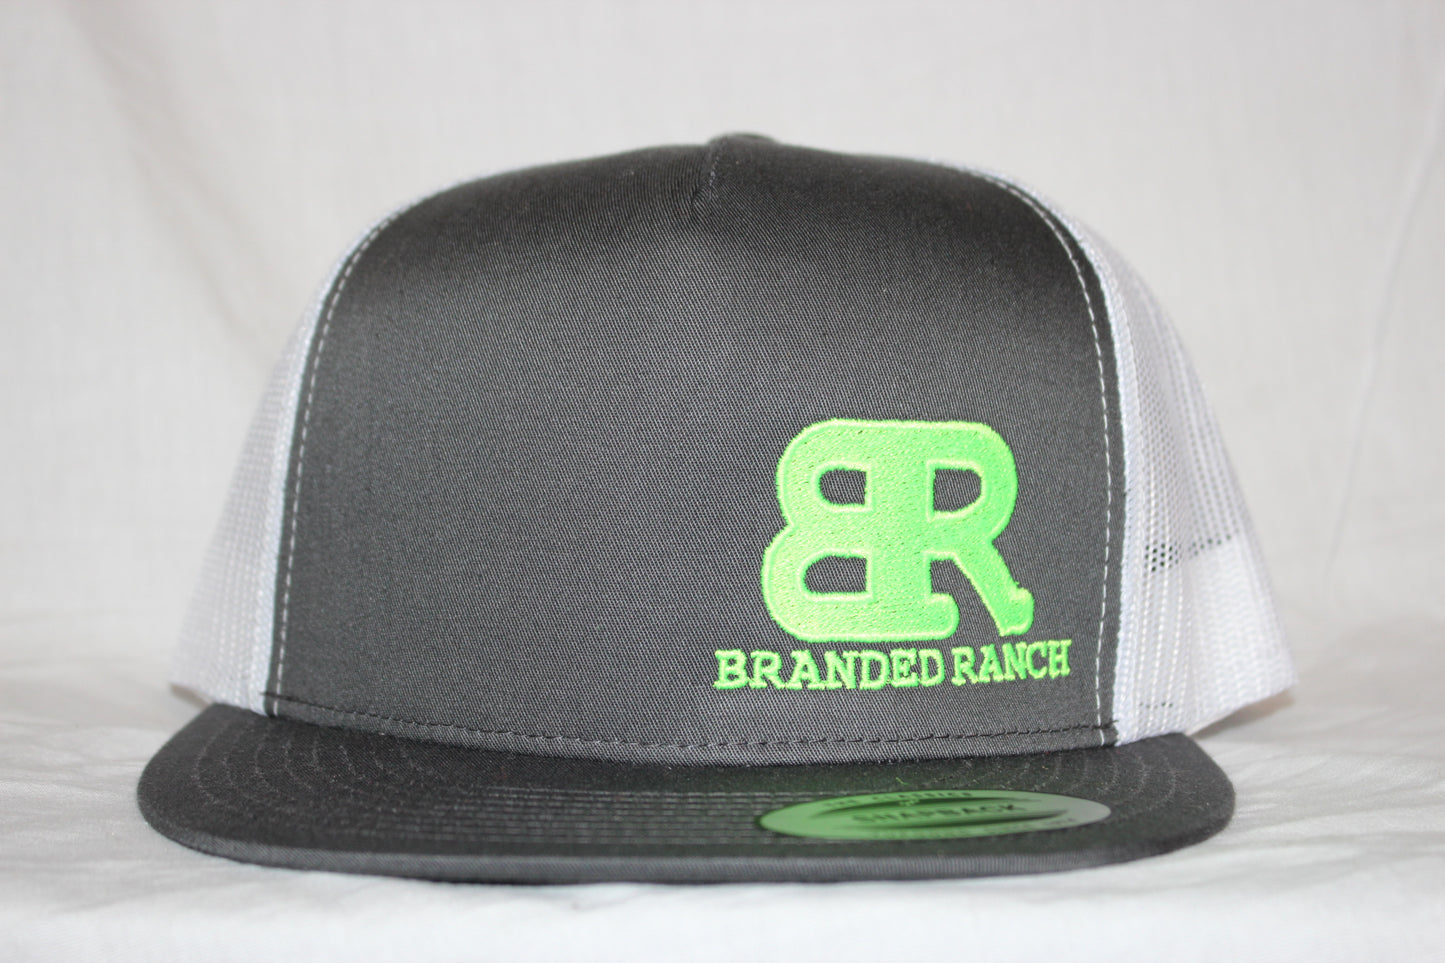 Branded Ranch "The Lime"  SnapBack